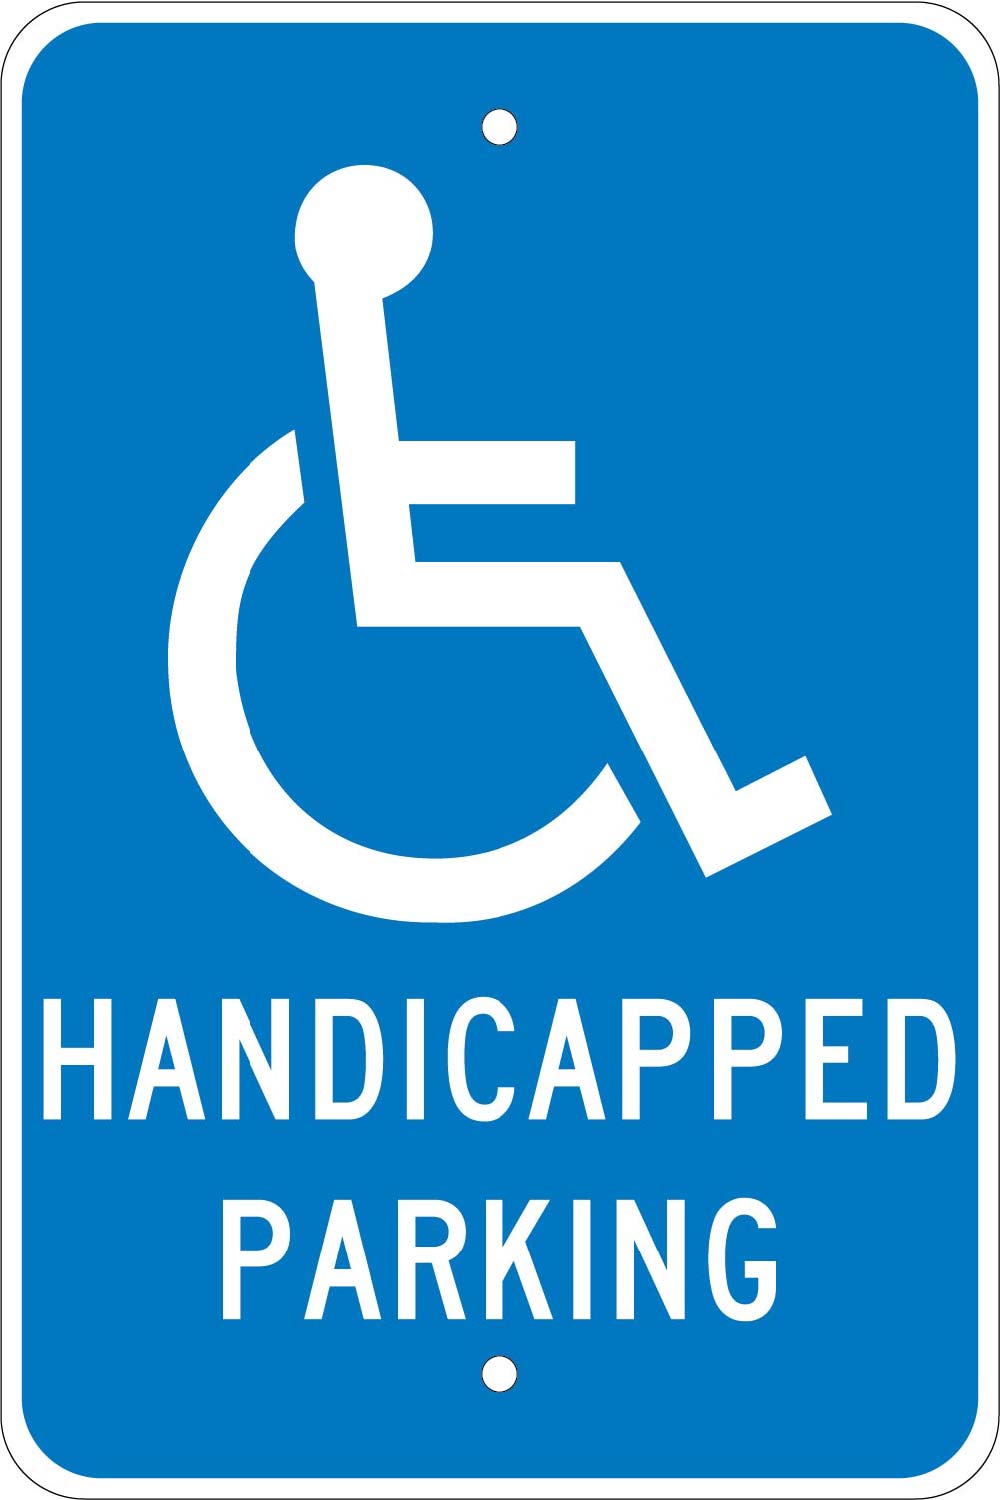 Handicapped Parking Sign-eSafety Supplies, Inc